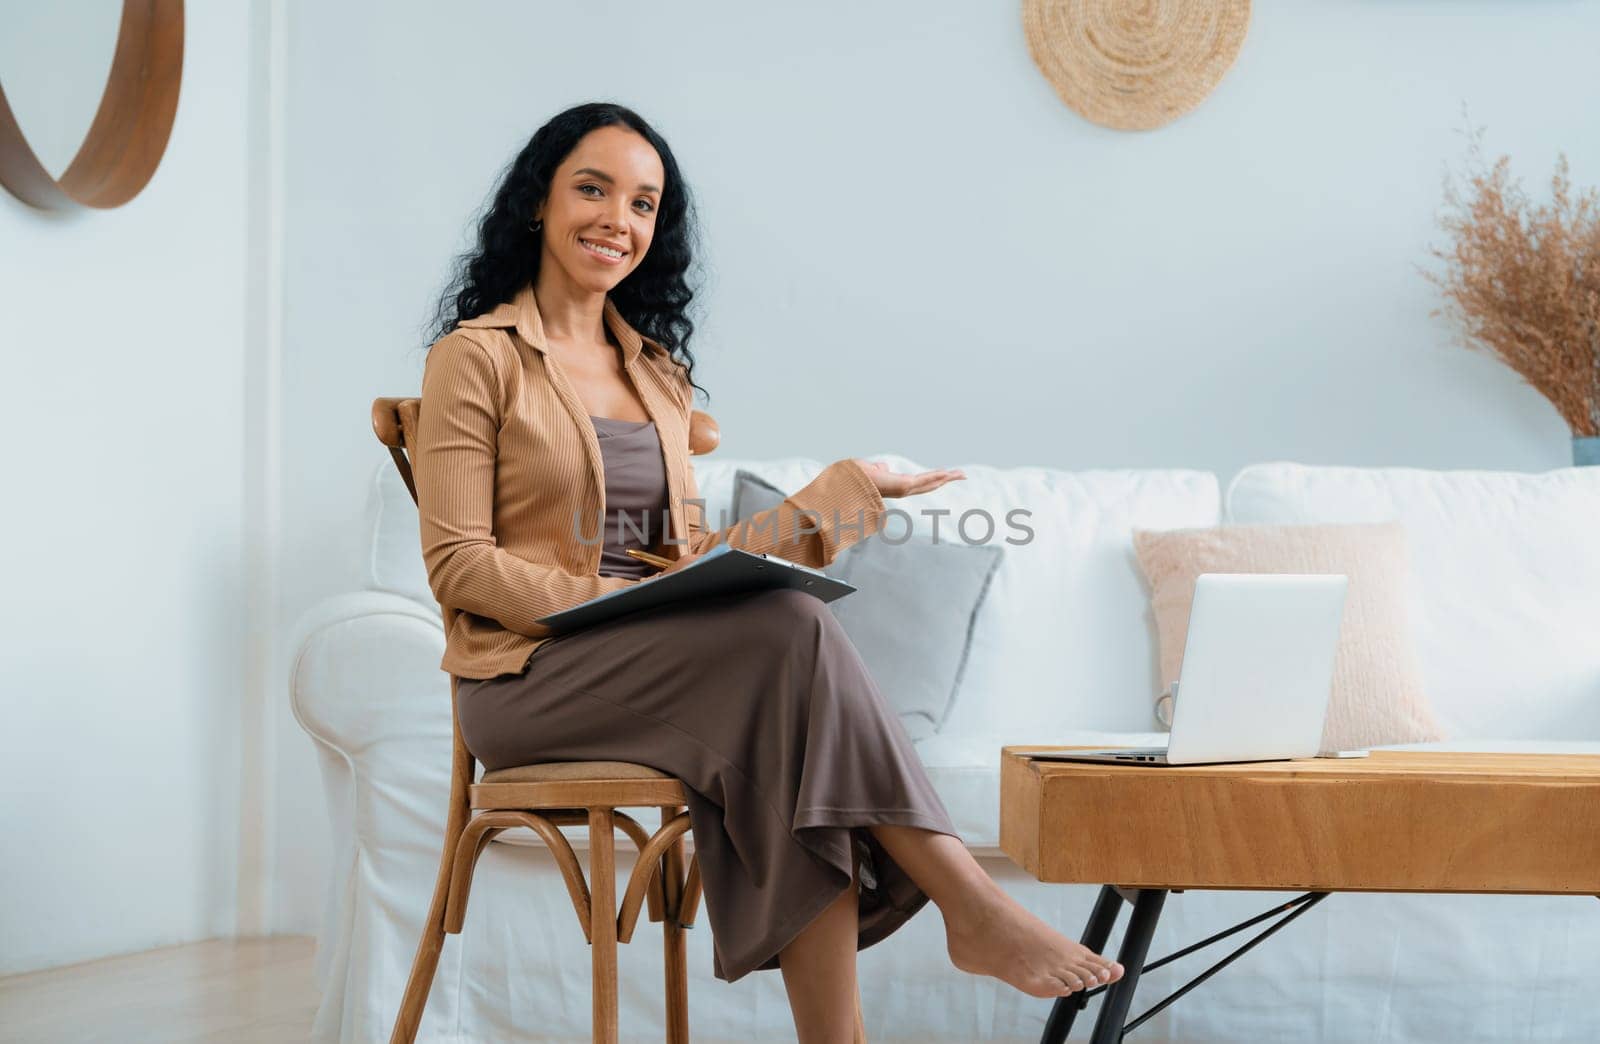 Psychologist woman in clinic office professional portrait with friendly smile feeling inviting for patient to visit the psychologist. The experienced and confident psychologist is crucial specialist